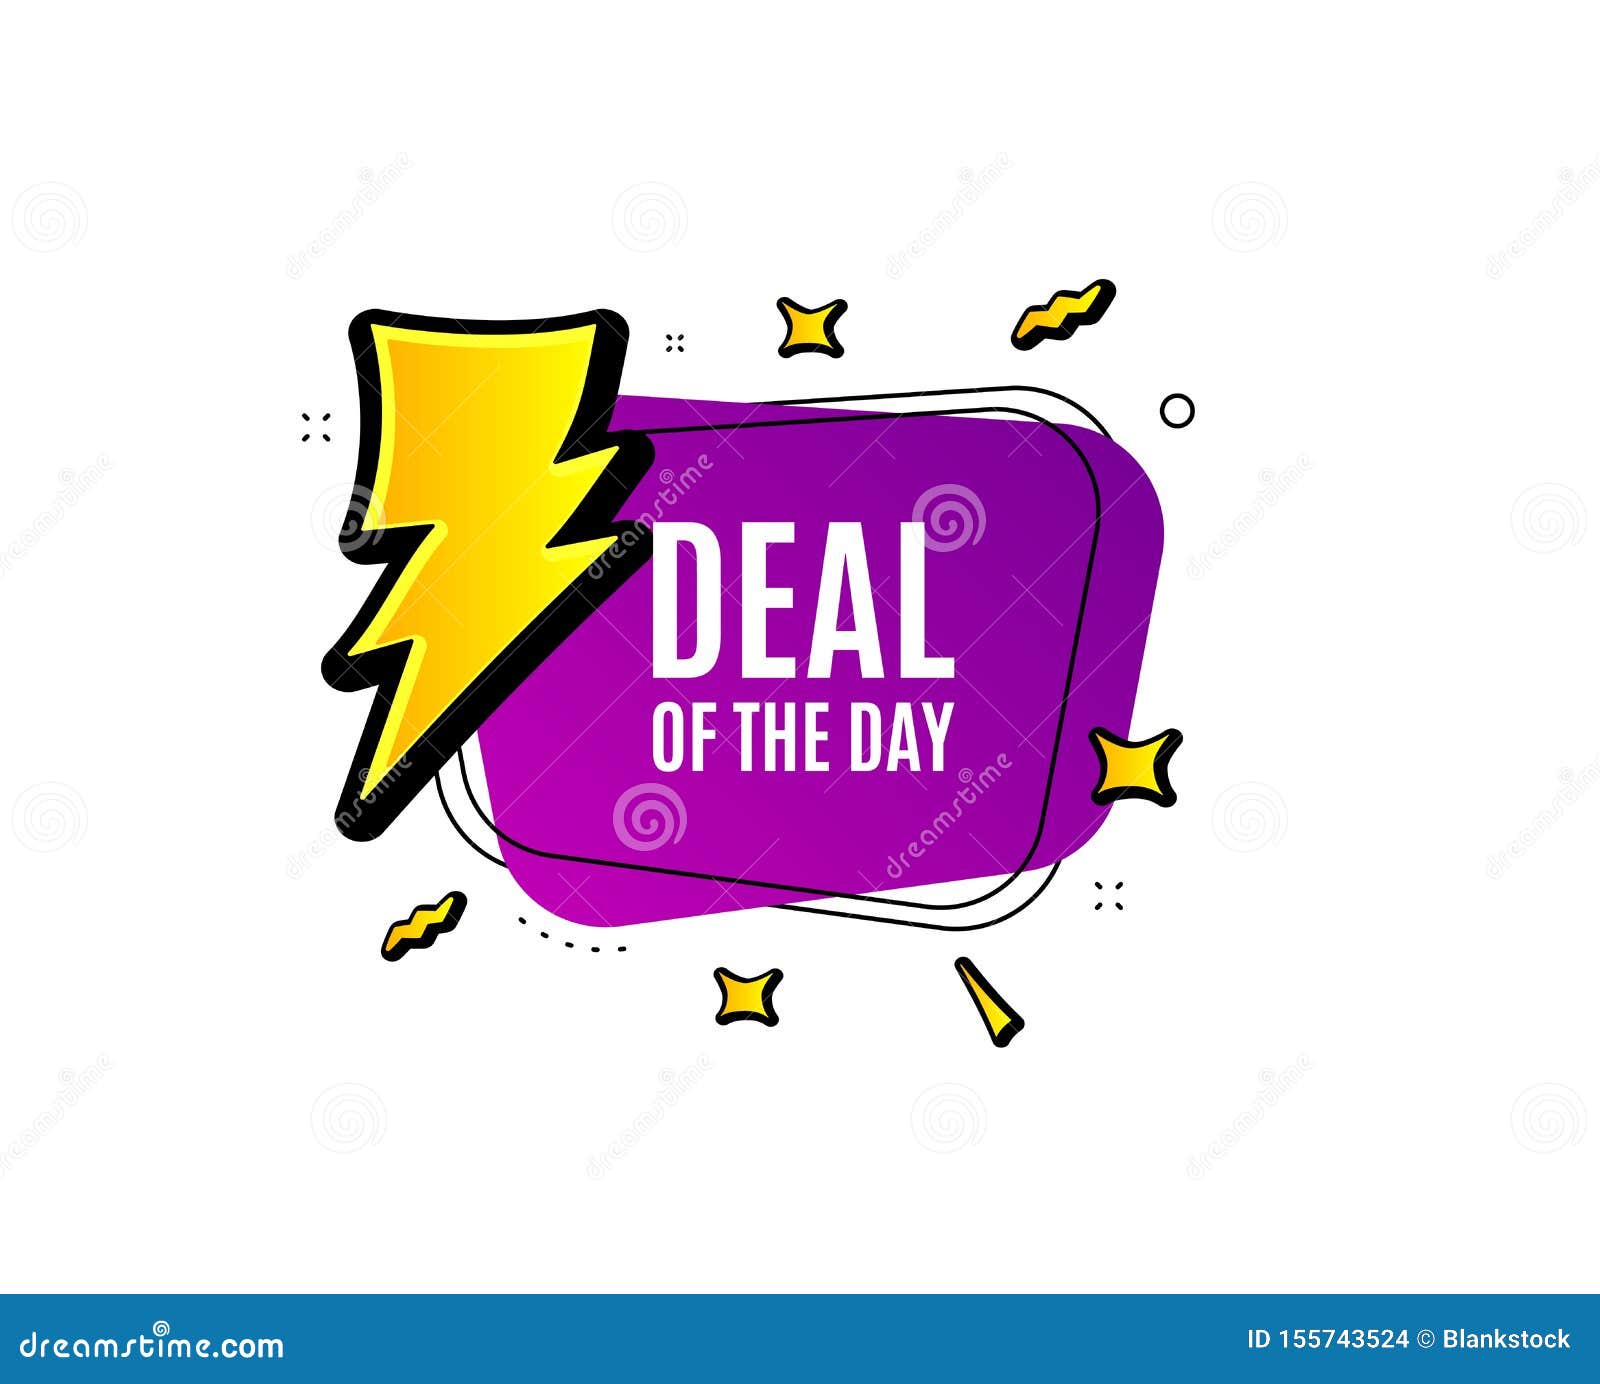 https://thumbs.dreamstime.com/z/deal-day-symbol-special-offer-price-sign-vector-banner-badge-sticker-advertising-discounts-155743524.jpg